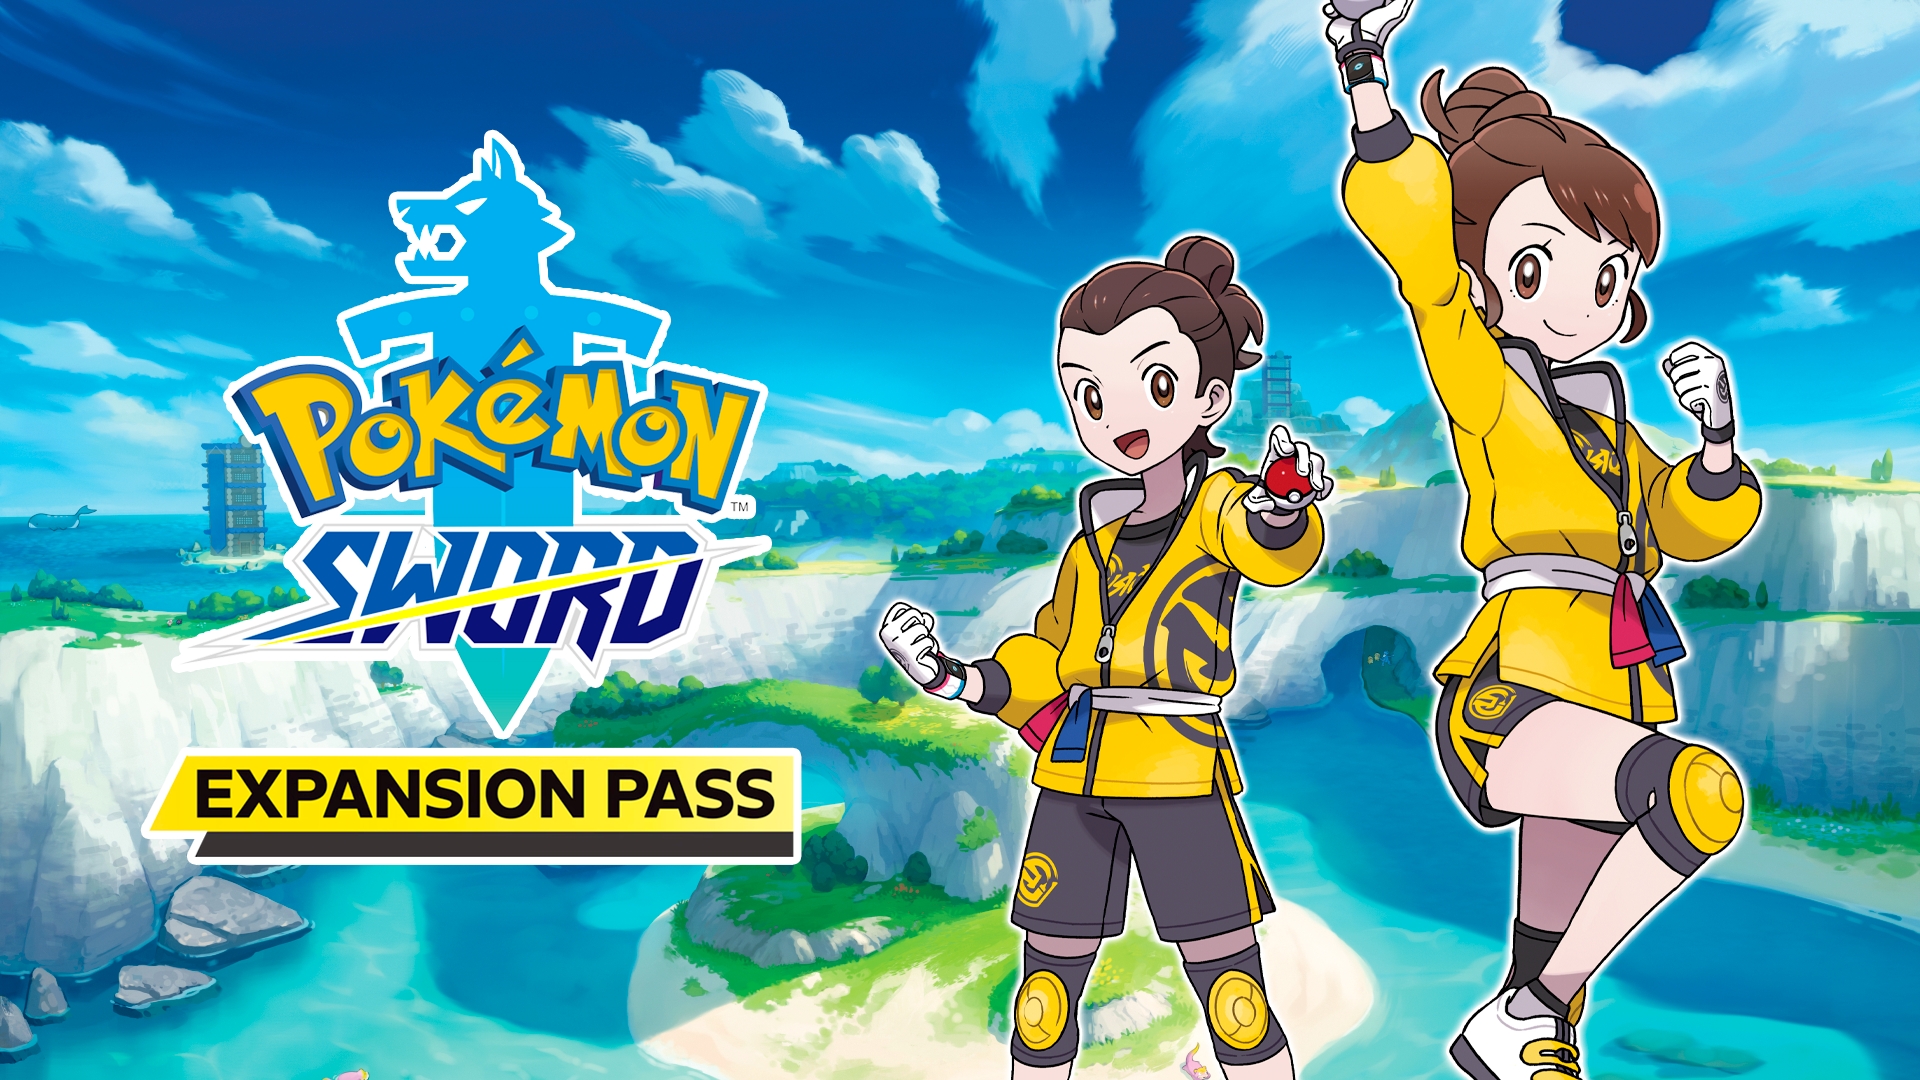 Pokémon Sword Apk + Expansion Pass On Android 100% Working & No